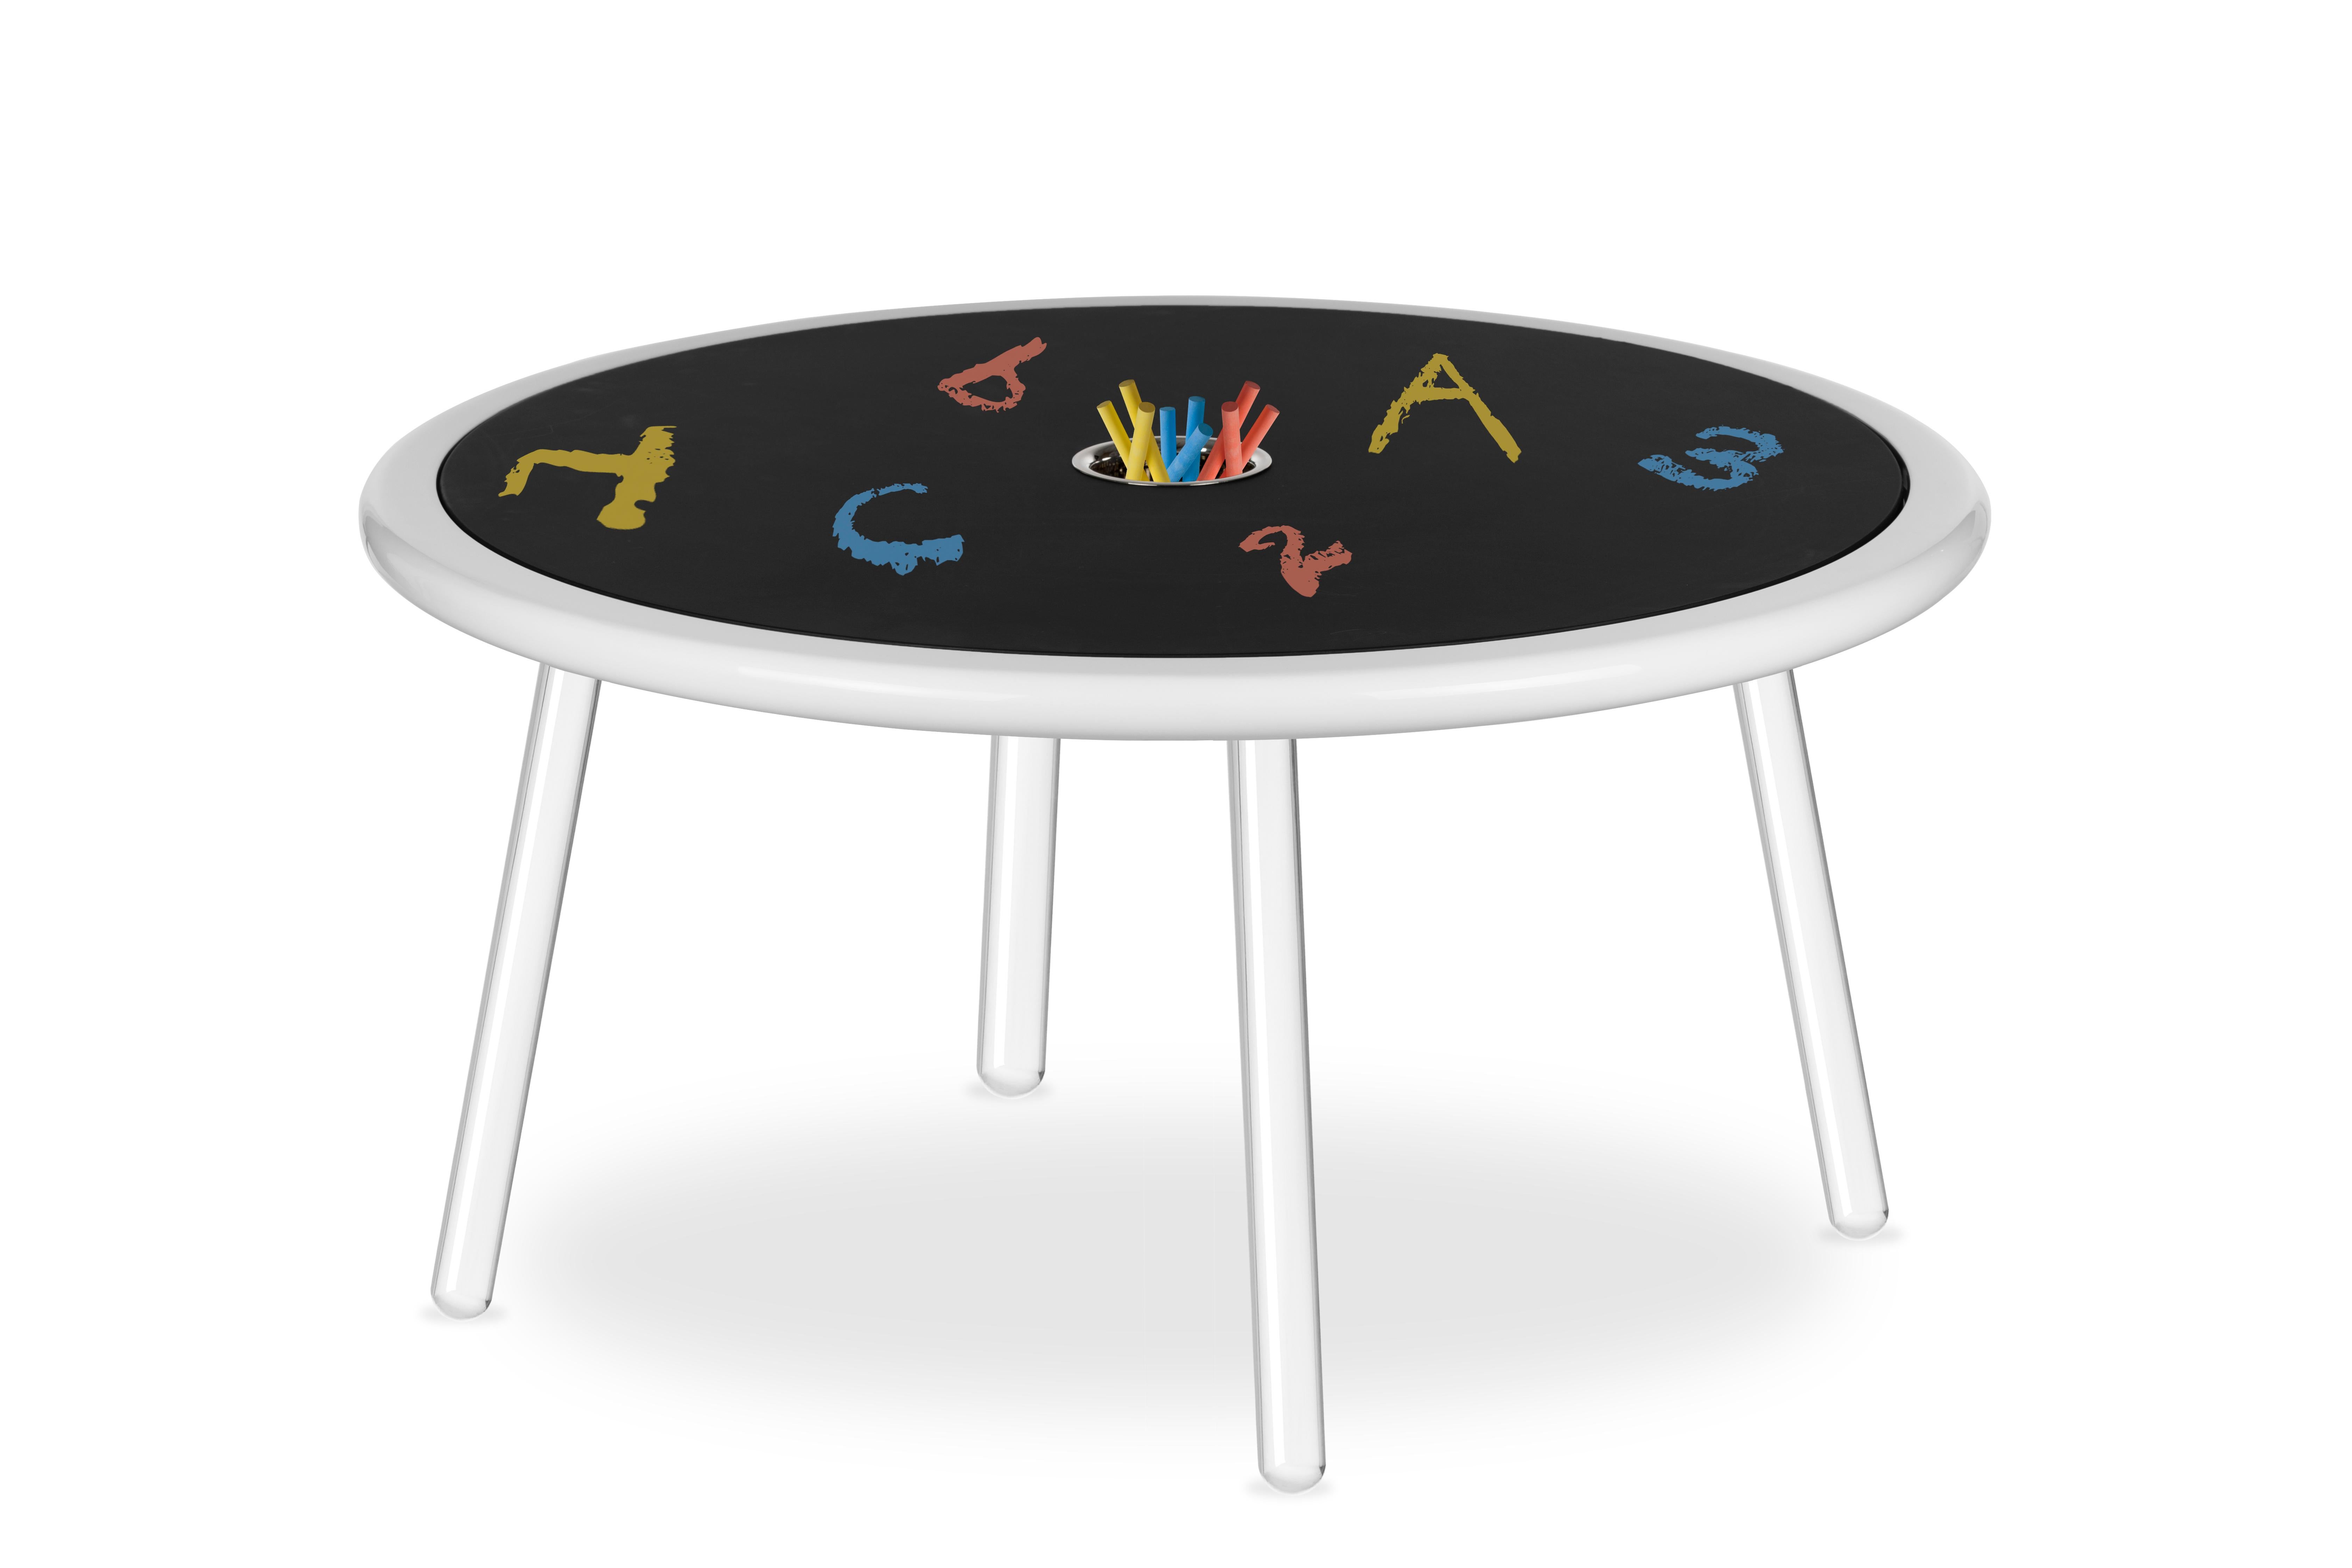 Portuguese Illusion Kids Table w/ Blackboard & Glossy Lacquered by Circu Magical Furniture For Sale